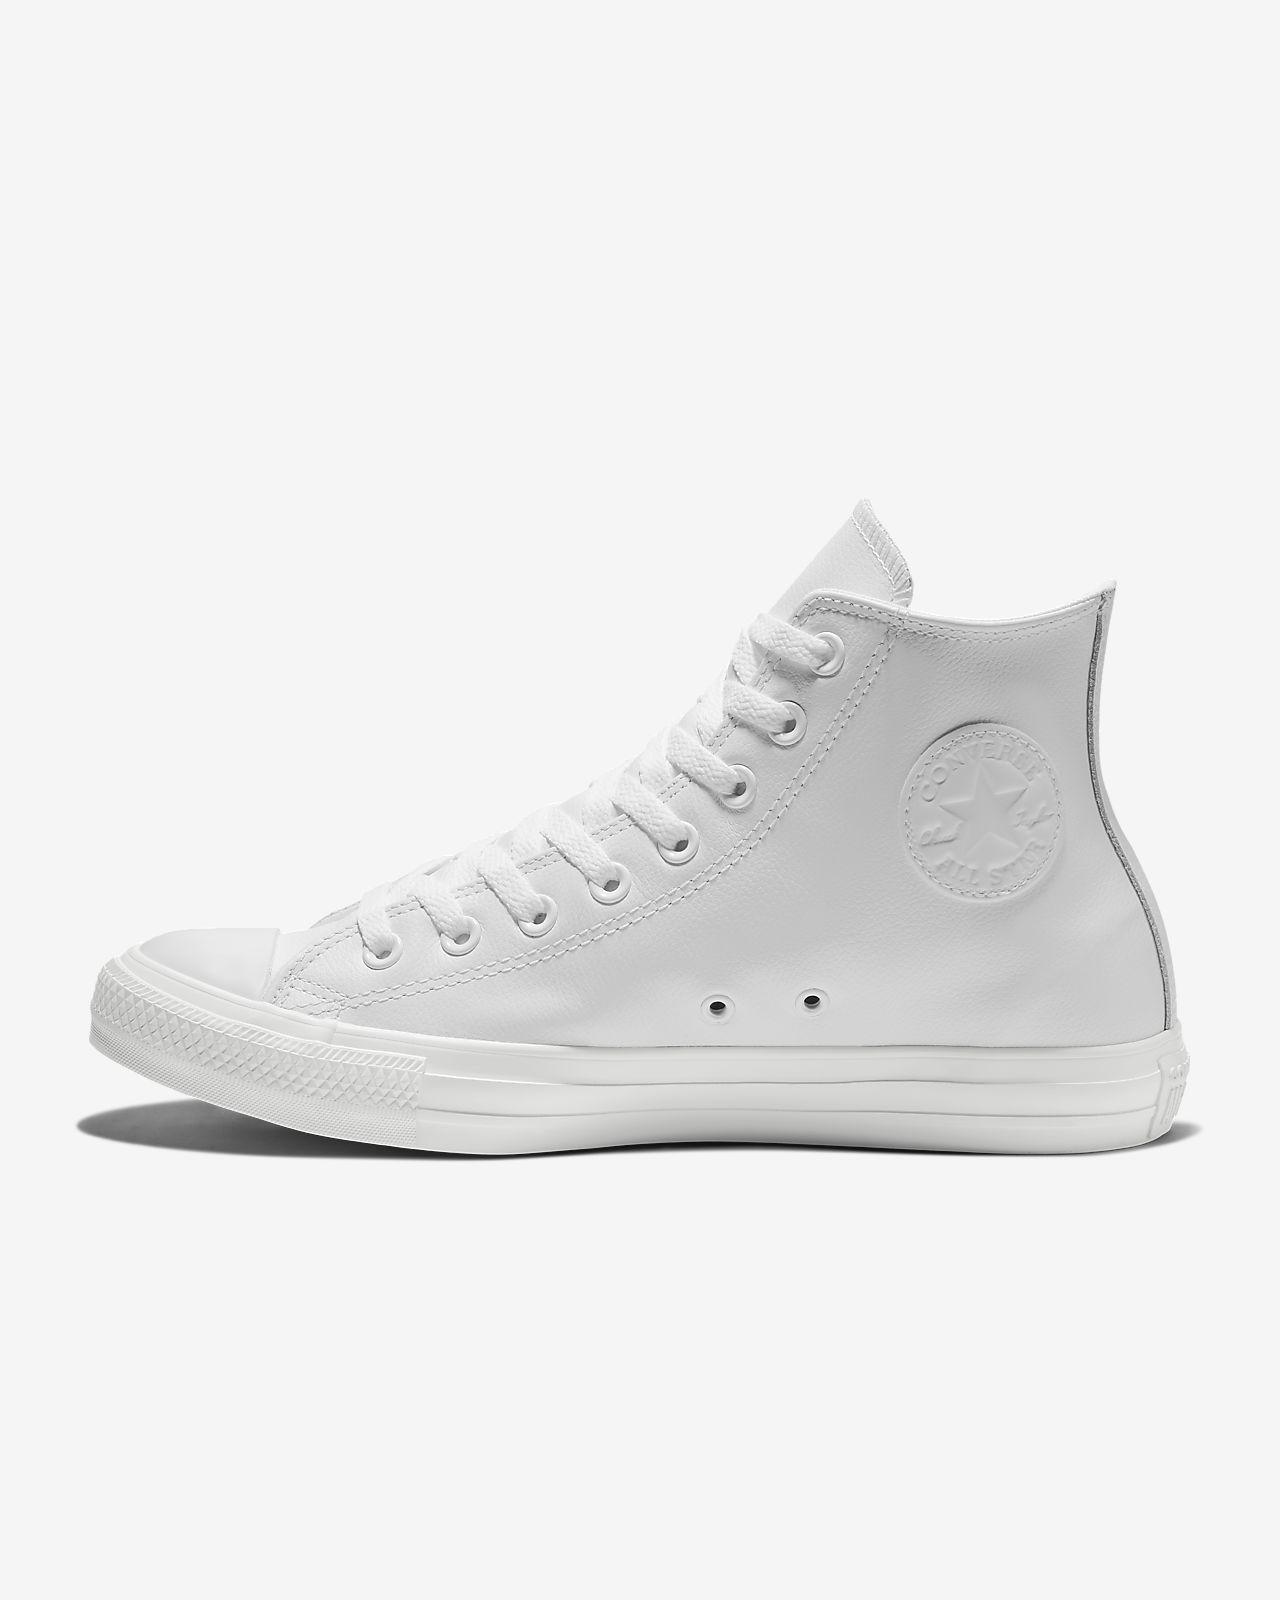 Converse Chuck Taylor All Star Leather High Top Unisex Shoe